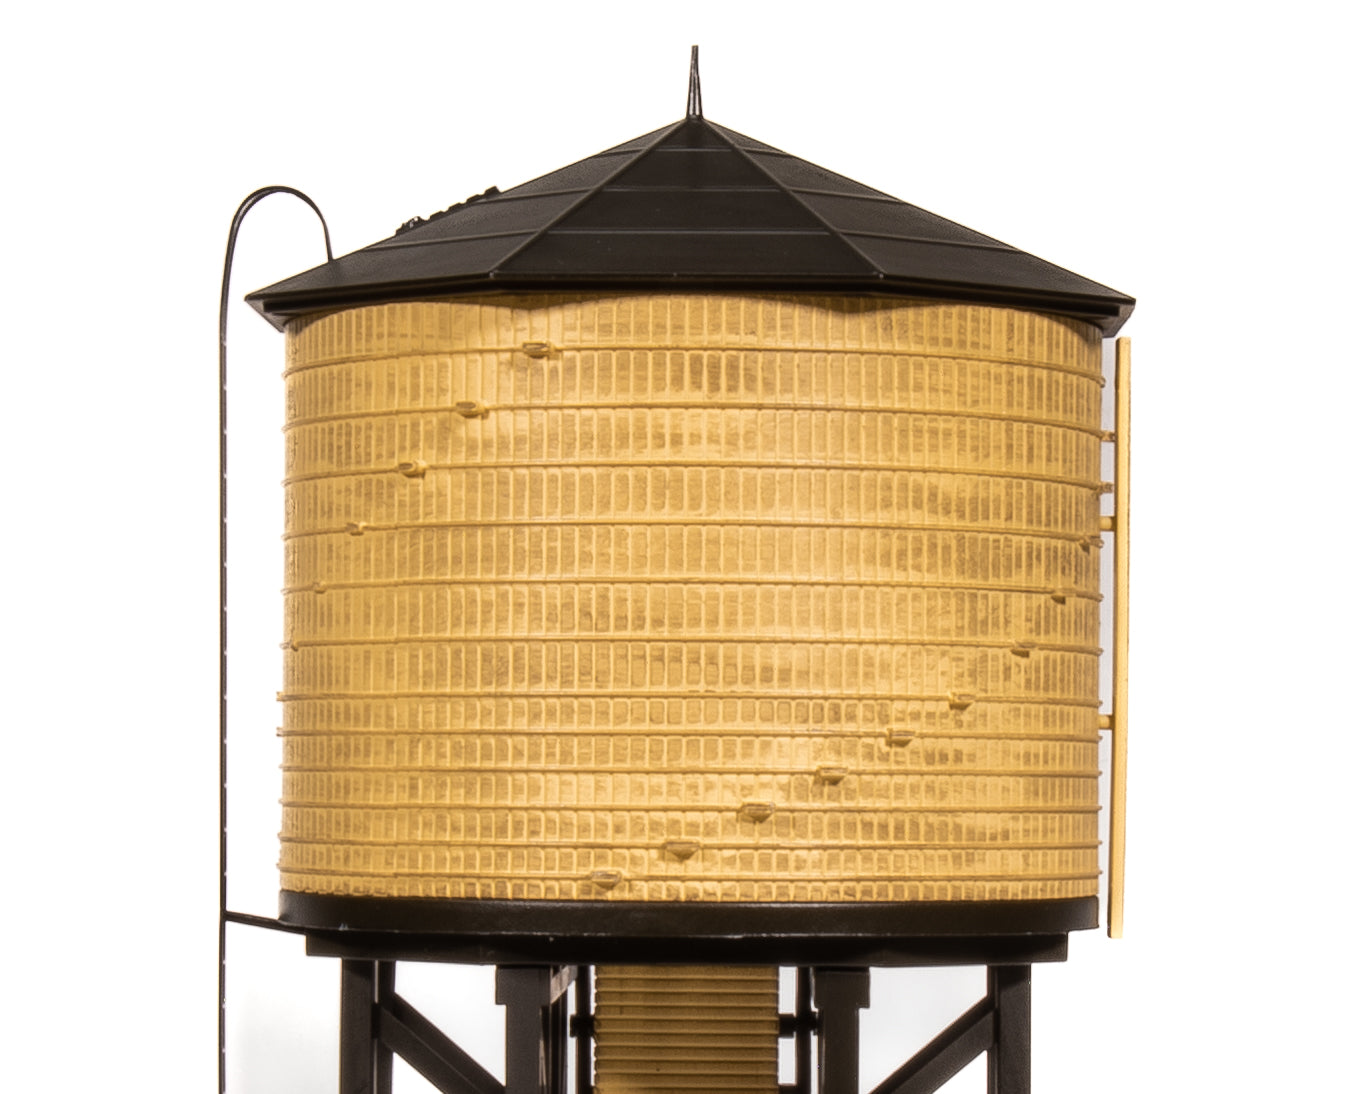 7912 Operating Water Tower w/ Sound, Weathered Yellow, Unlettered, HO Default Title